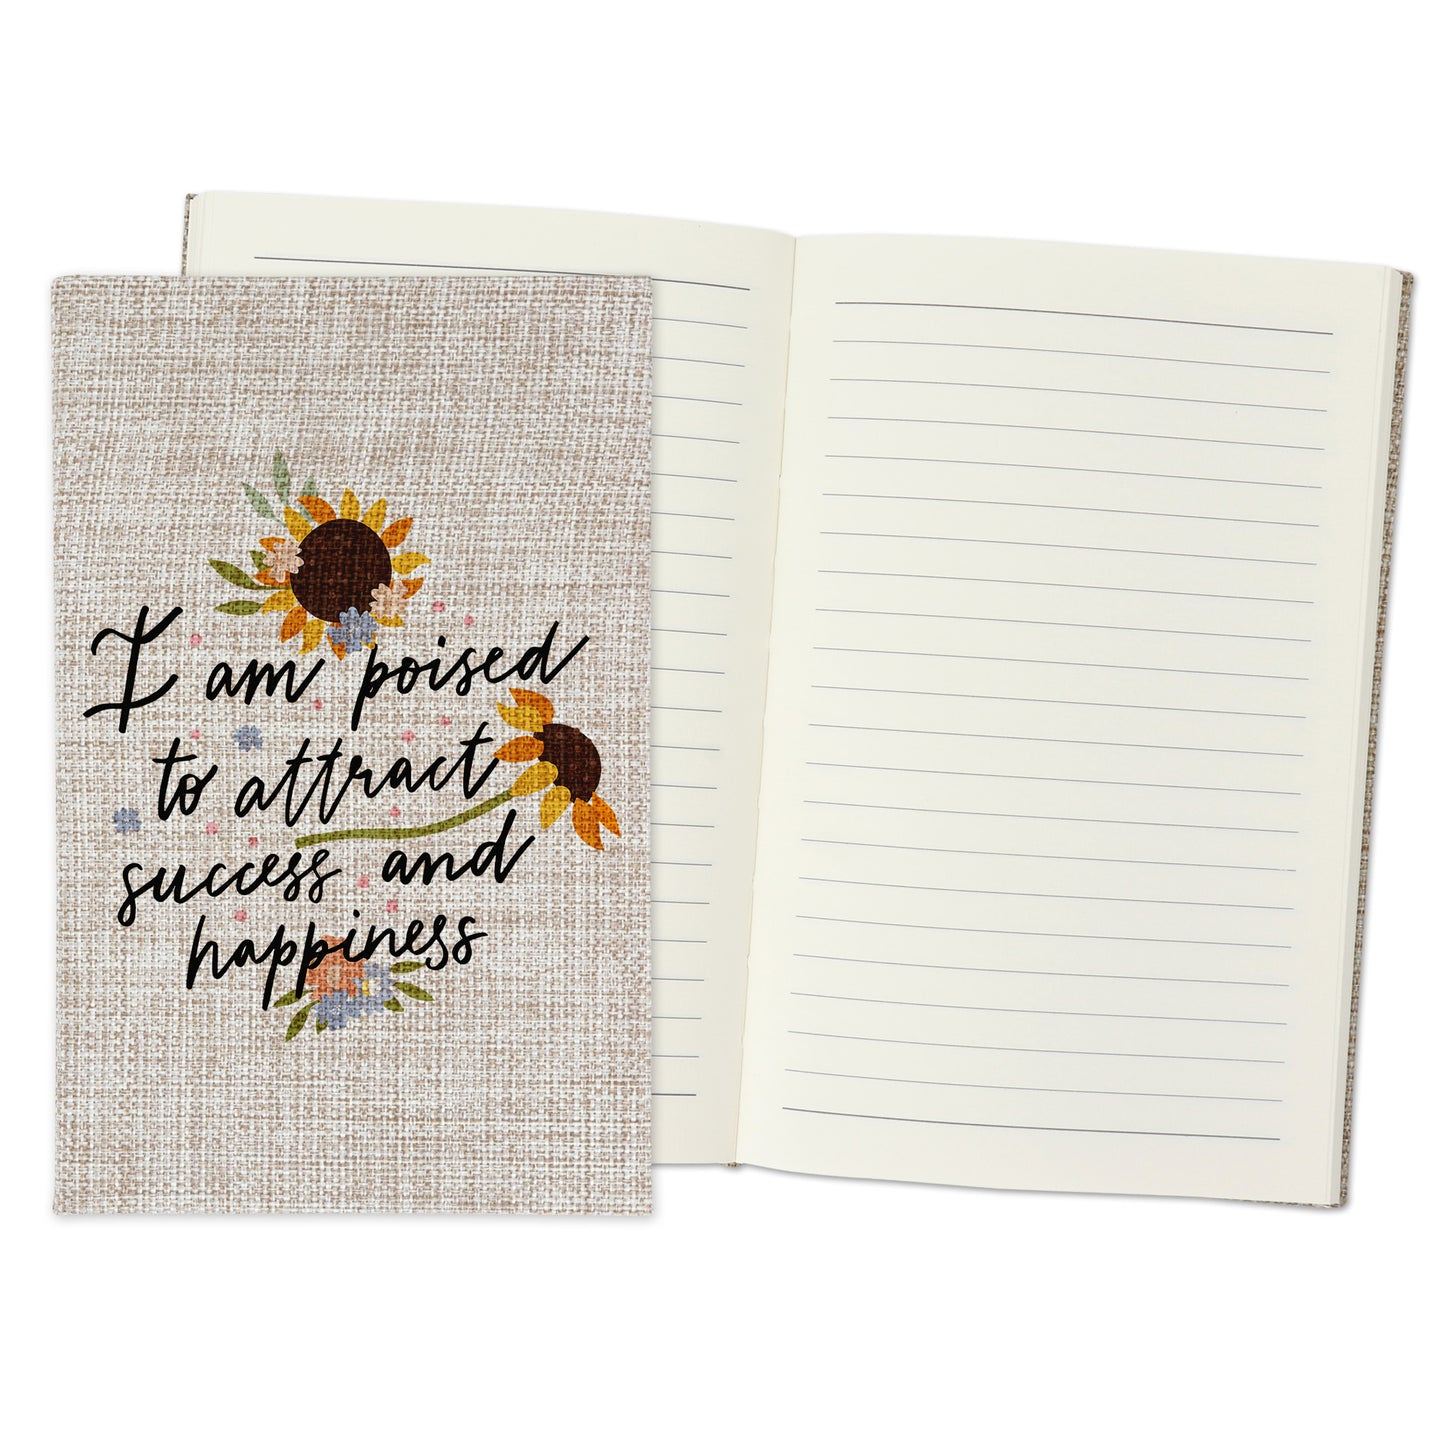 I am Poised to Attract Success and Happiness - Affirmation Quote Burlap Notebook Journal with Lined Pages